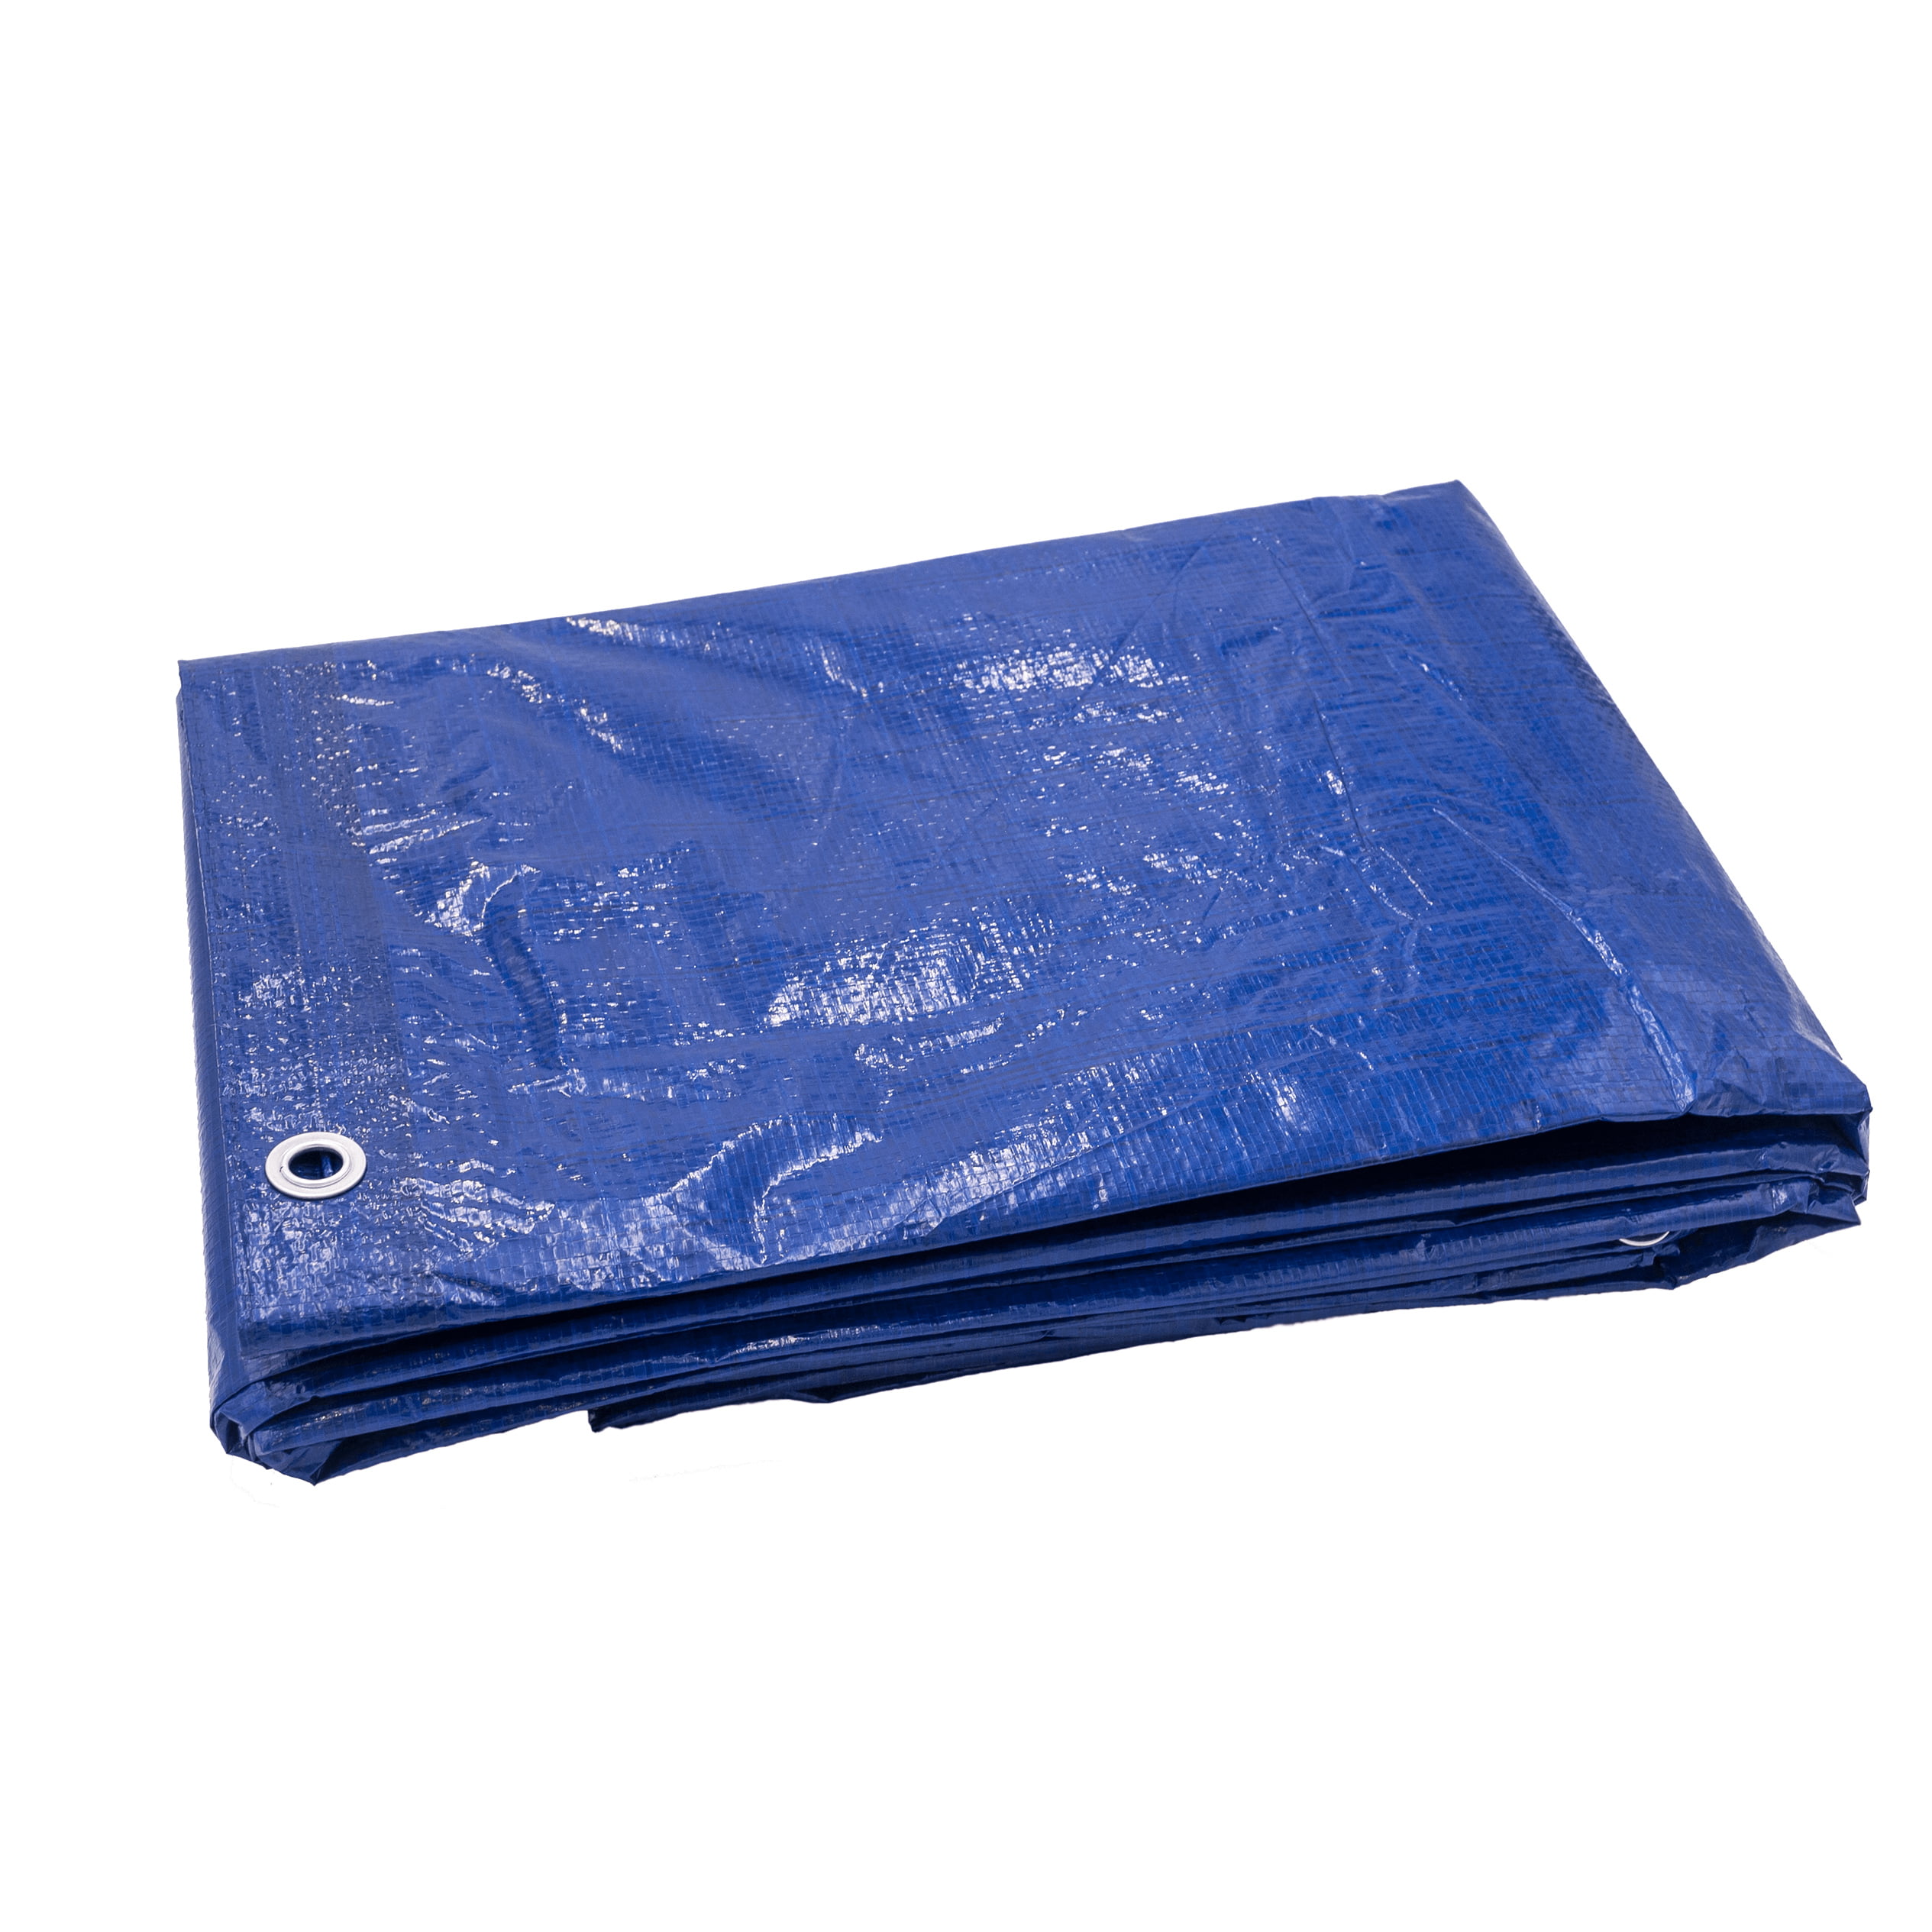 16'x24' Blue Poly Tarp 2.9 OZ Economy Lightweight Waterproof Cover Camping 